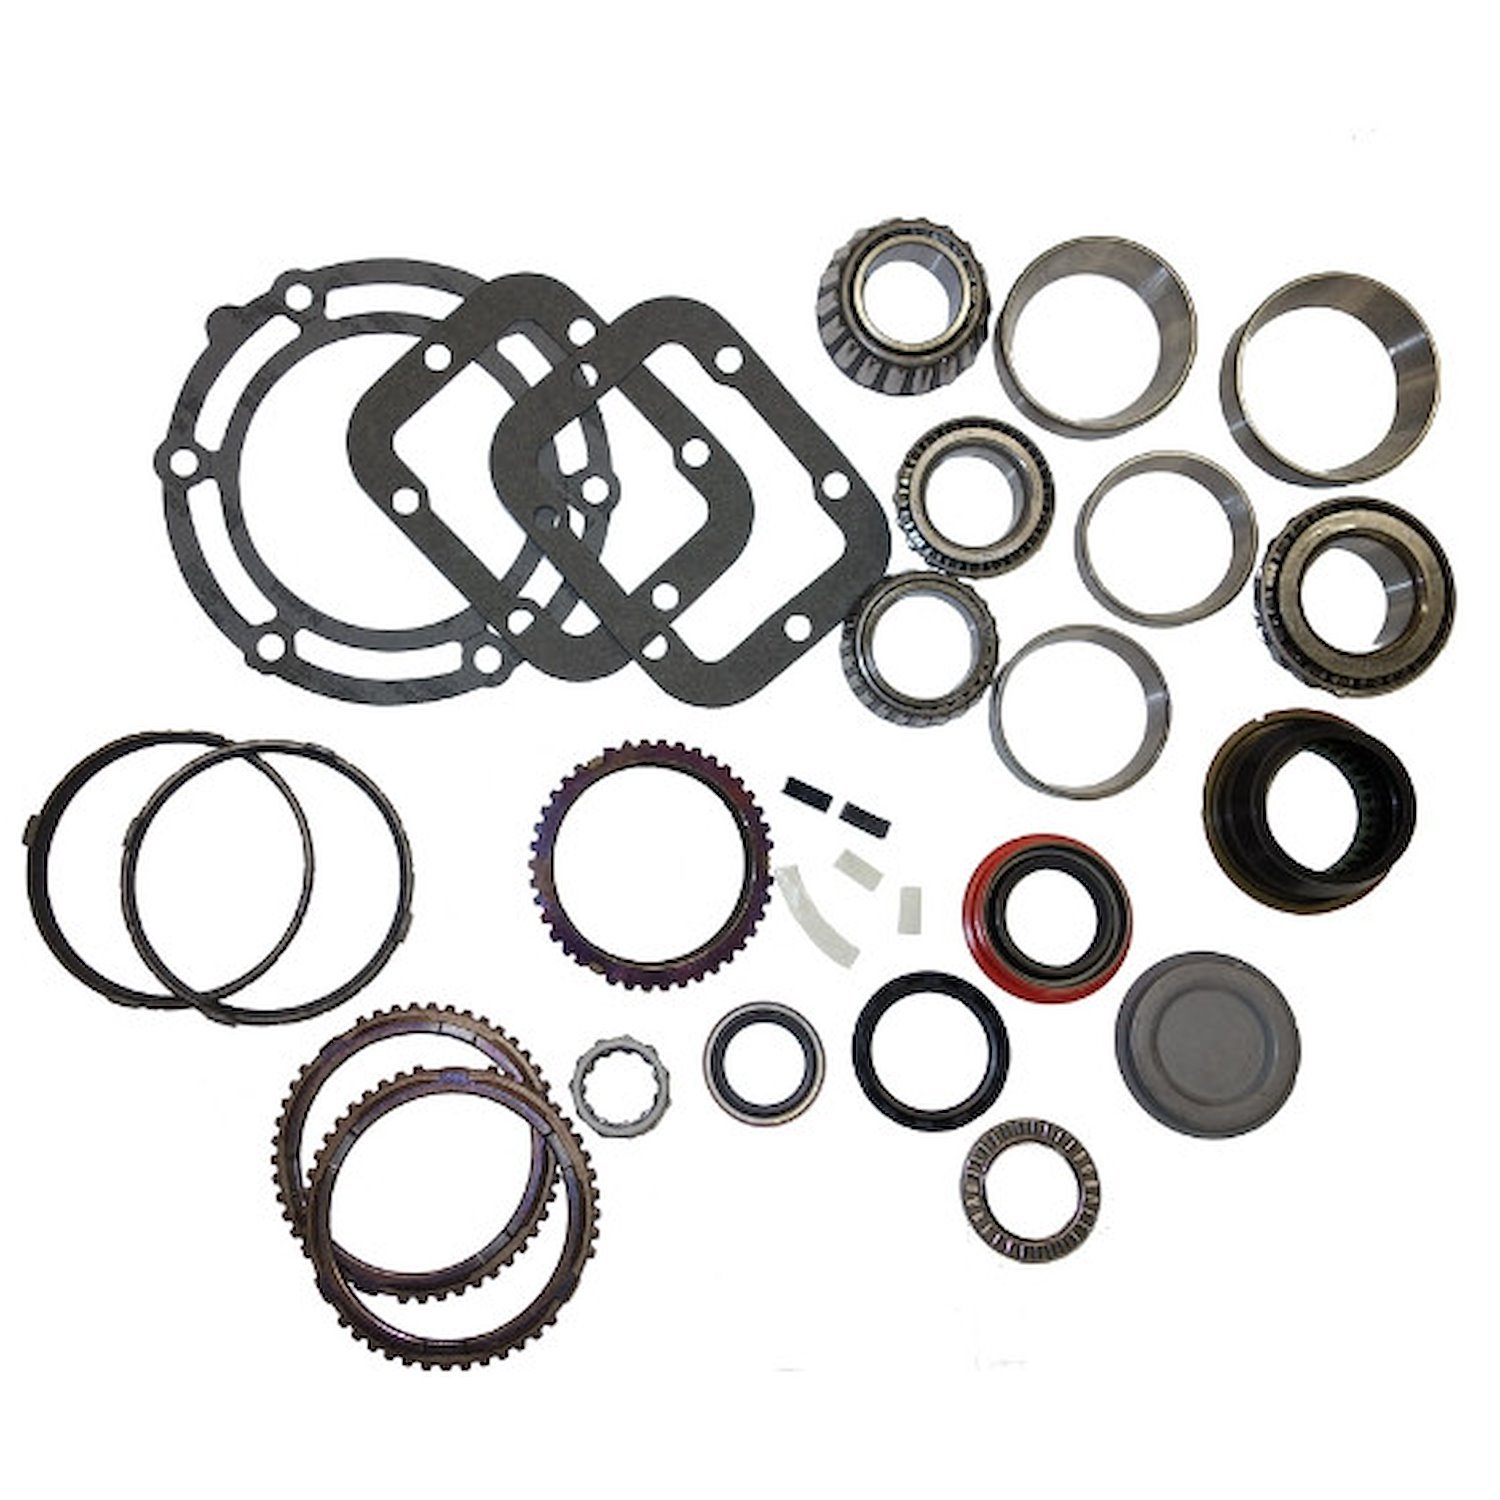 USA Standard 72077 Manual Transmission Bearing Kit, Mt8 1996-1998 GM With Synchro'S